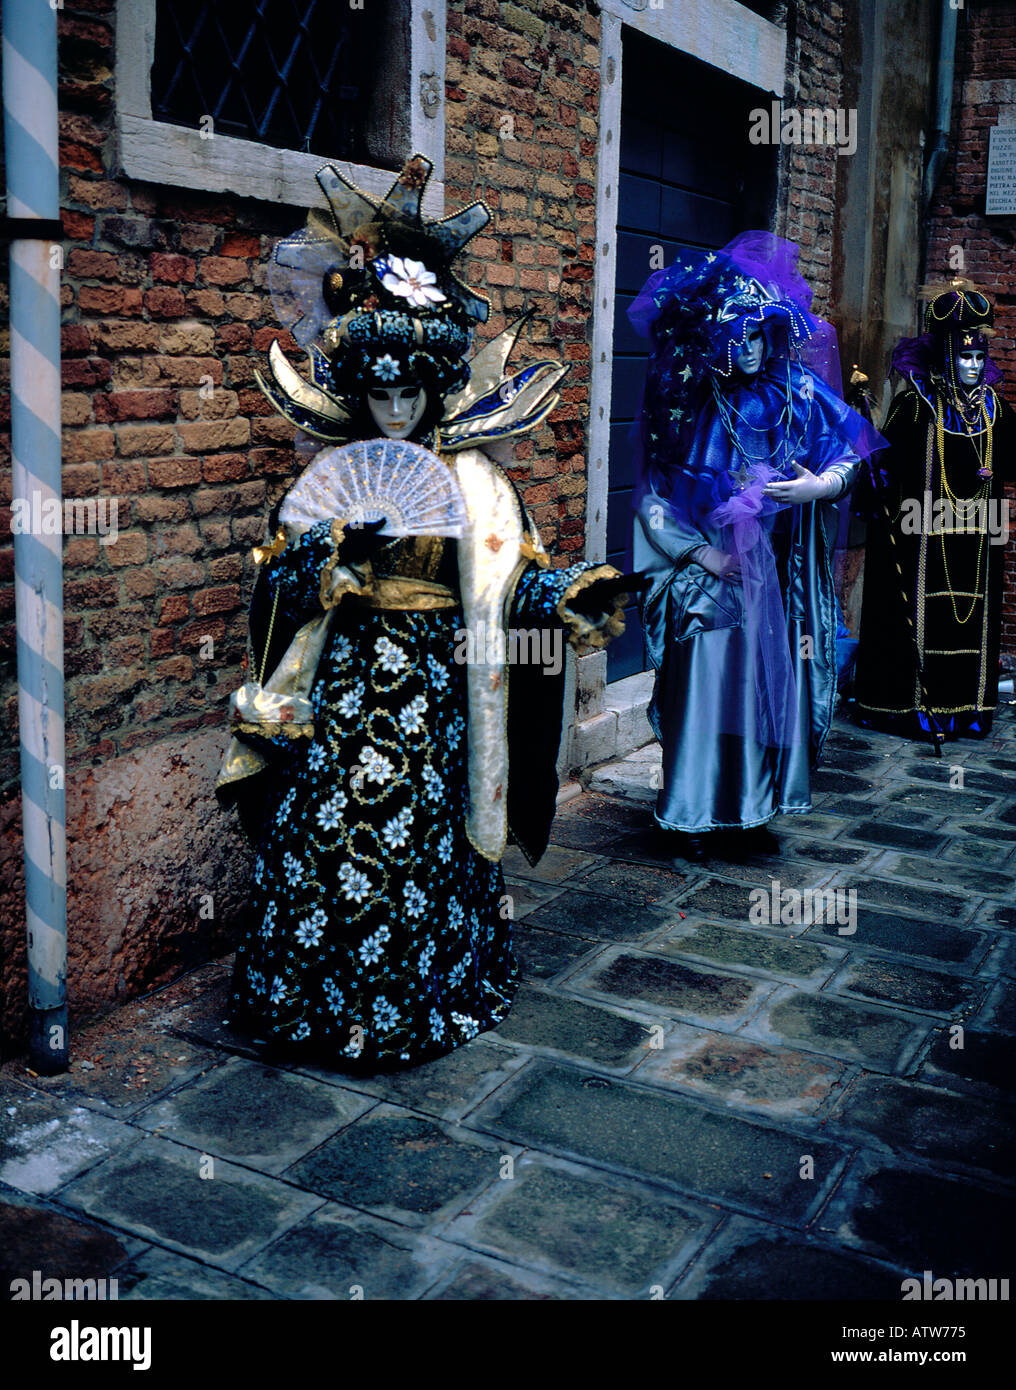 Carnival at Venice, UNESCO World Heritage Site, Italy Europe. Photo by Willy Matheisl Stock Photo